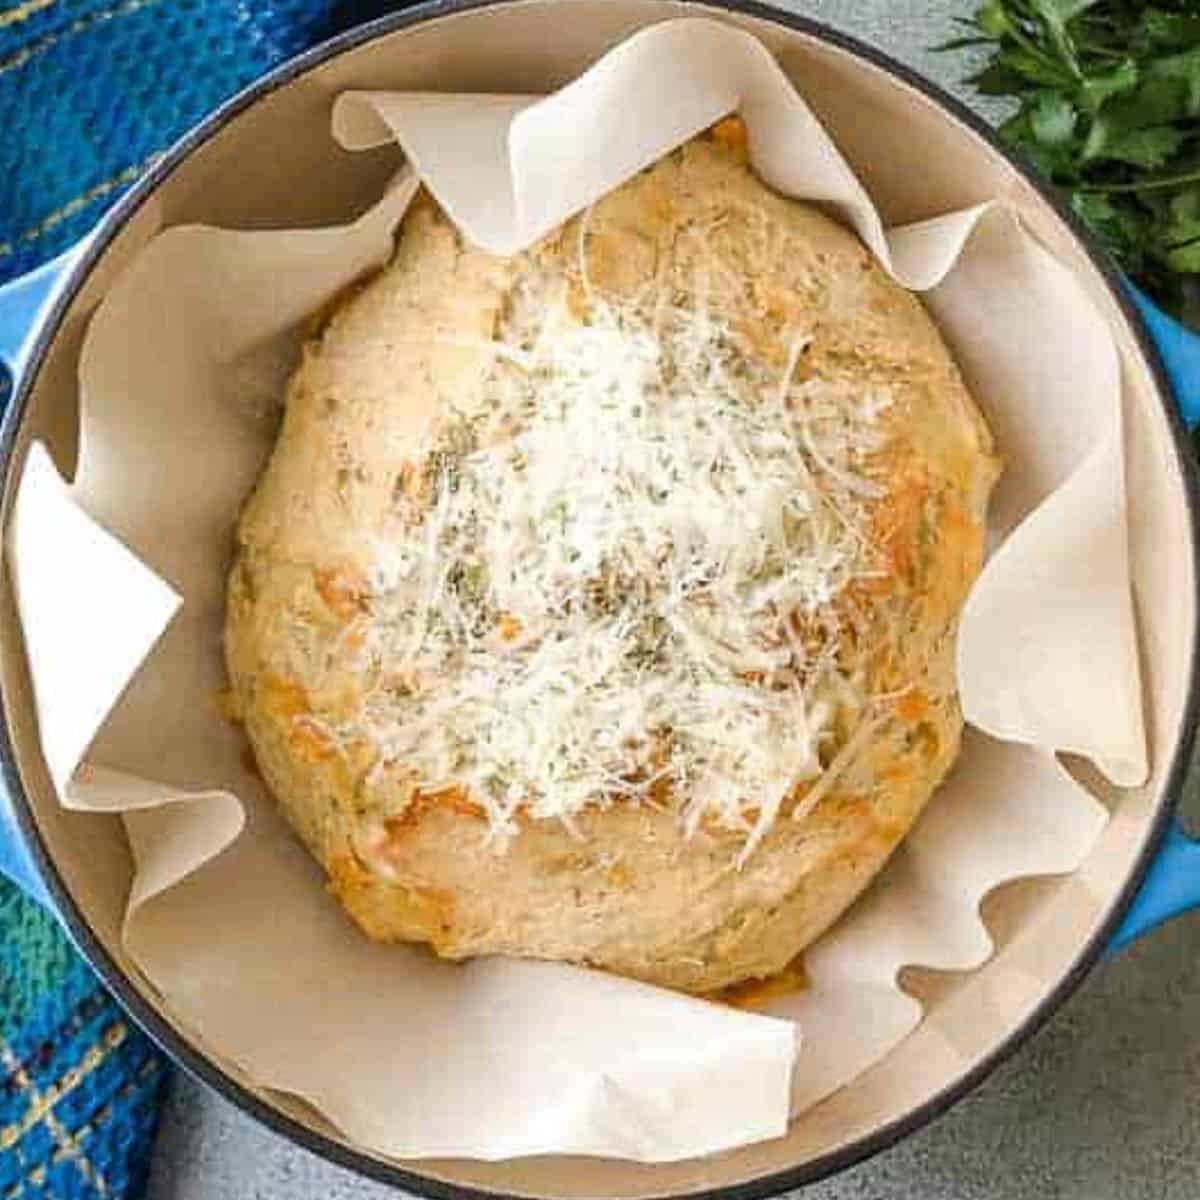 Dutch Oven Herb Bread - Completely Delicious